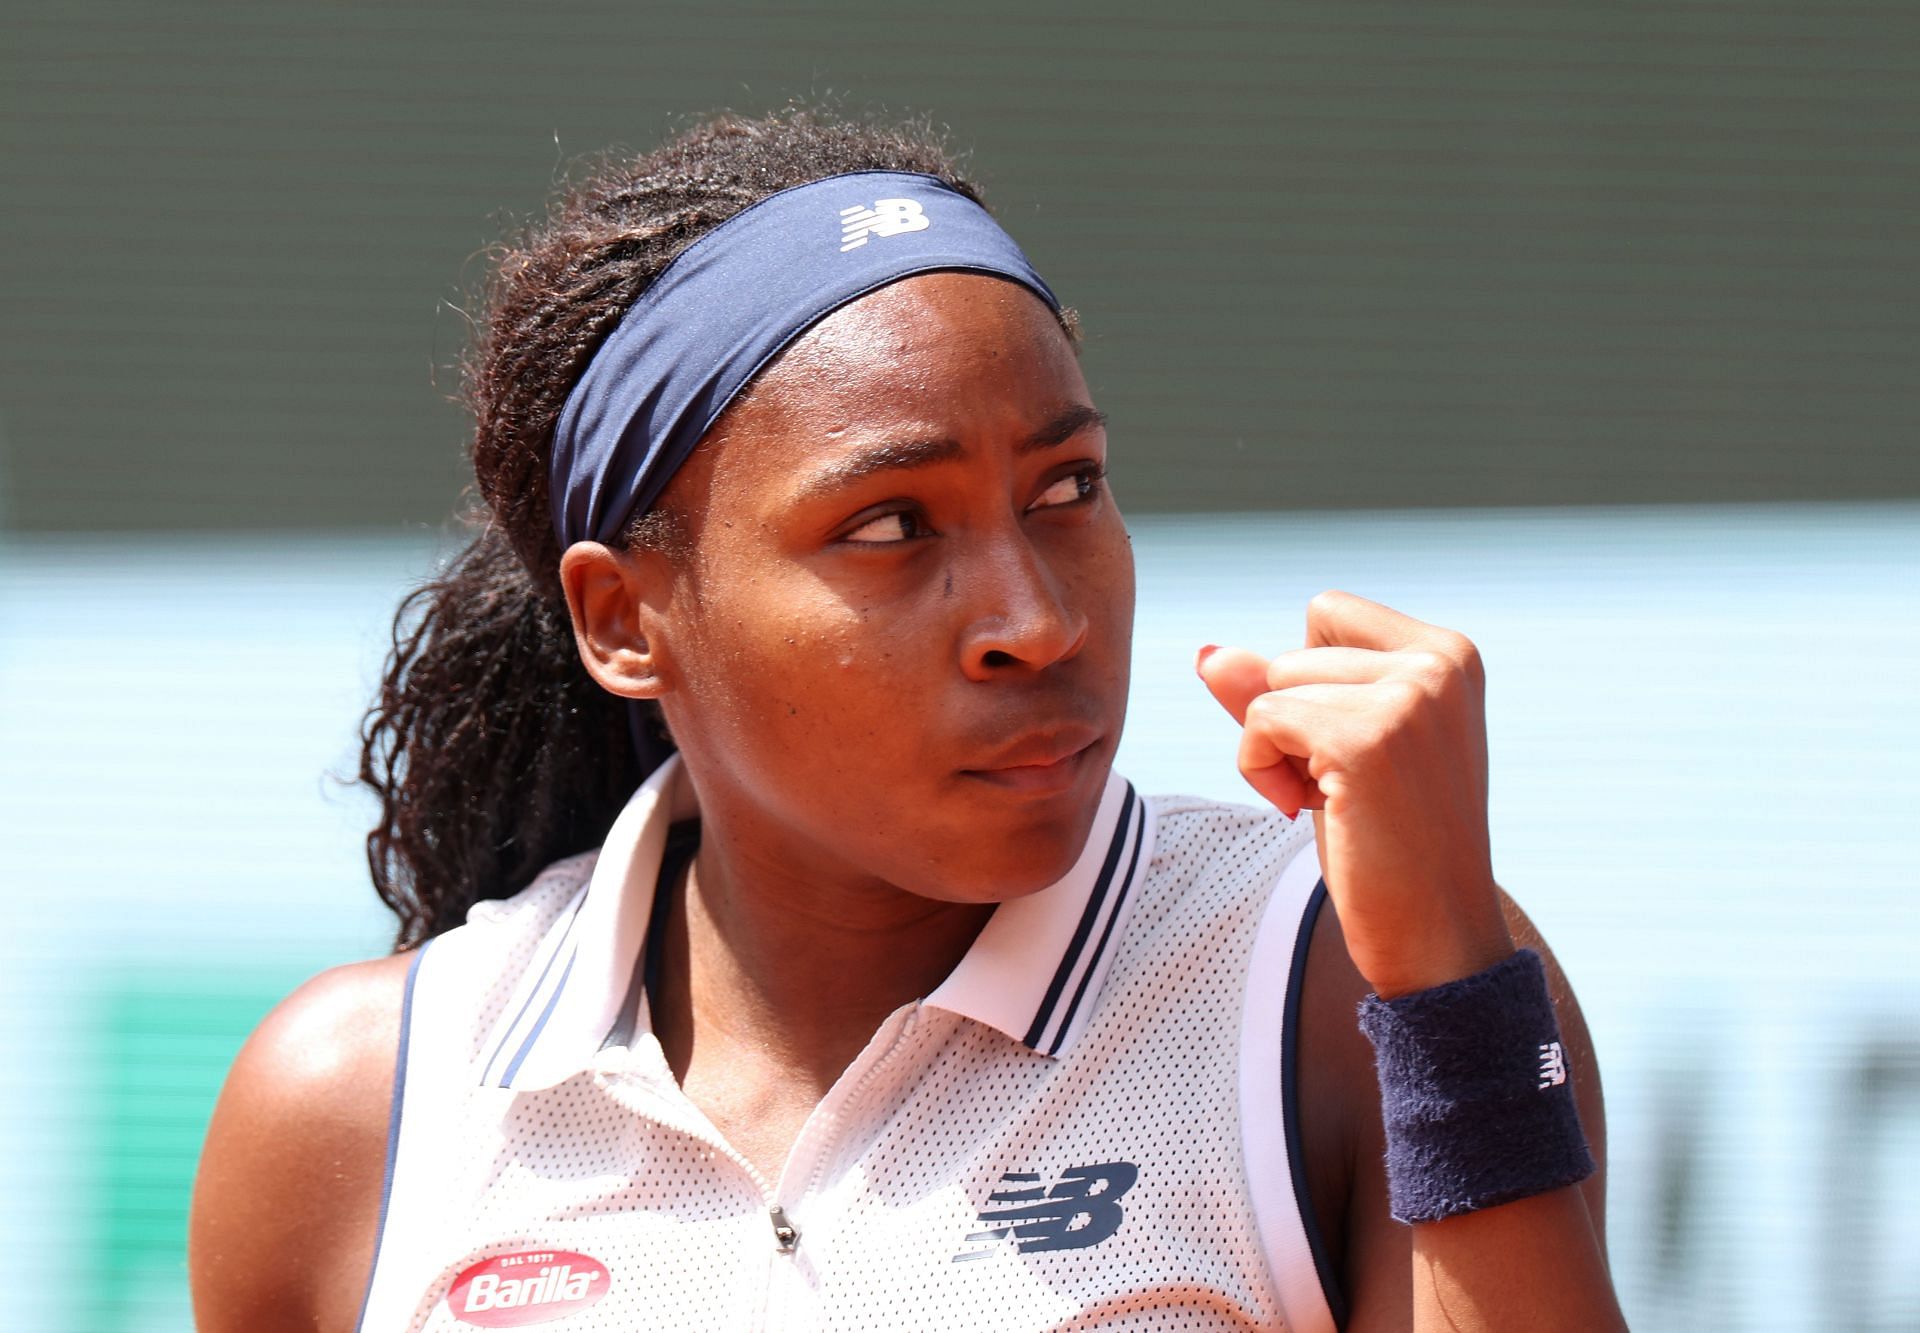 Paris Olympics 2024: Coco Gauff's projected path to the final ft. potential final clash vs. Iga Swiatek